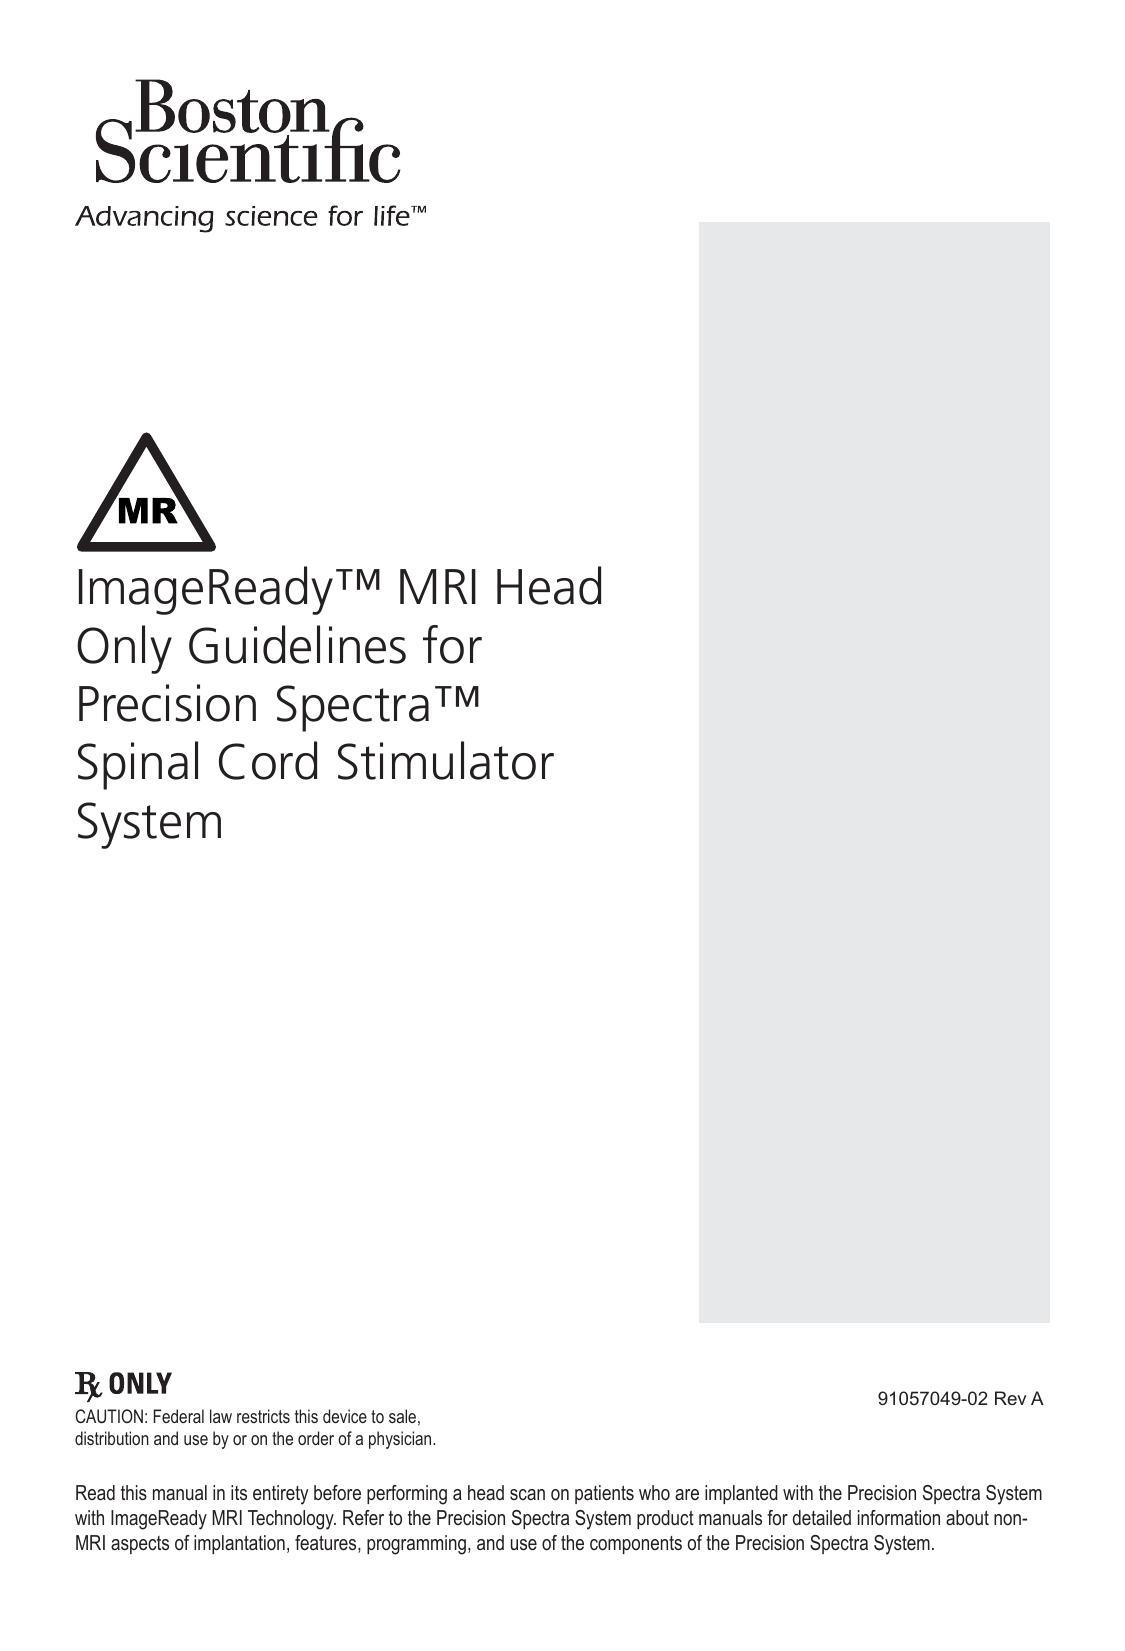 imageready-mri-guidelines-for-precision-spectra-tm-spinal-cord-stimulator-system.pdf